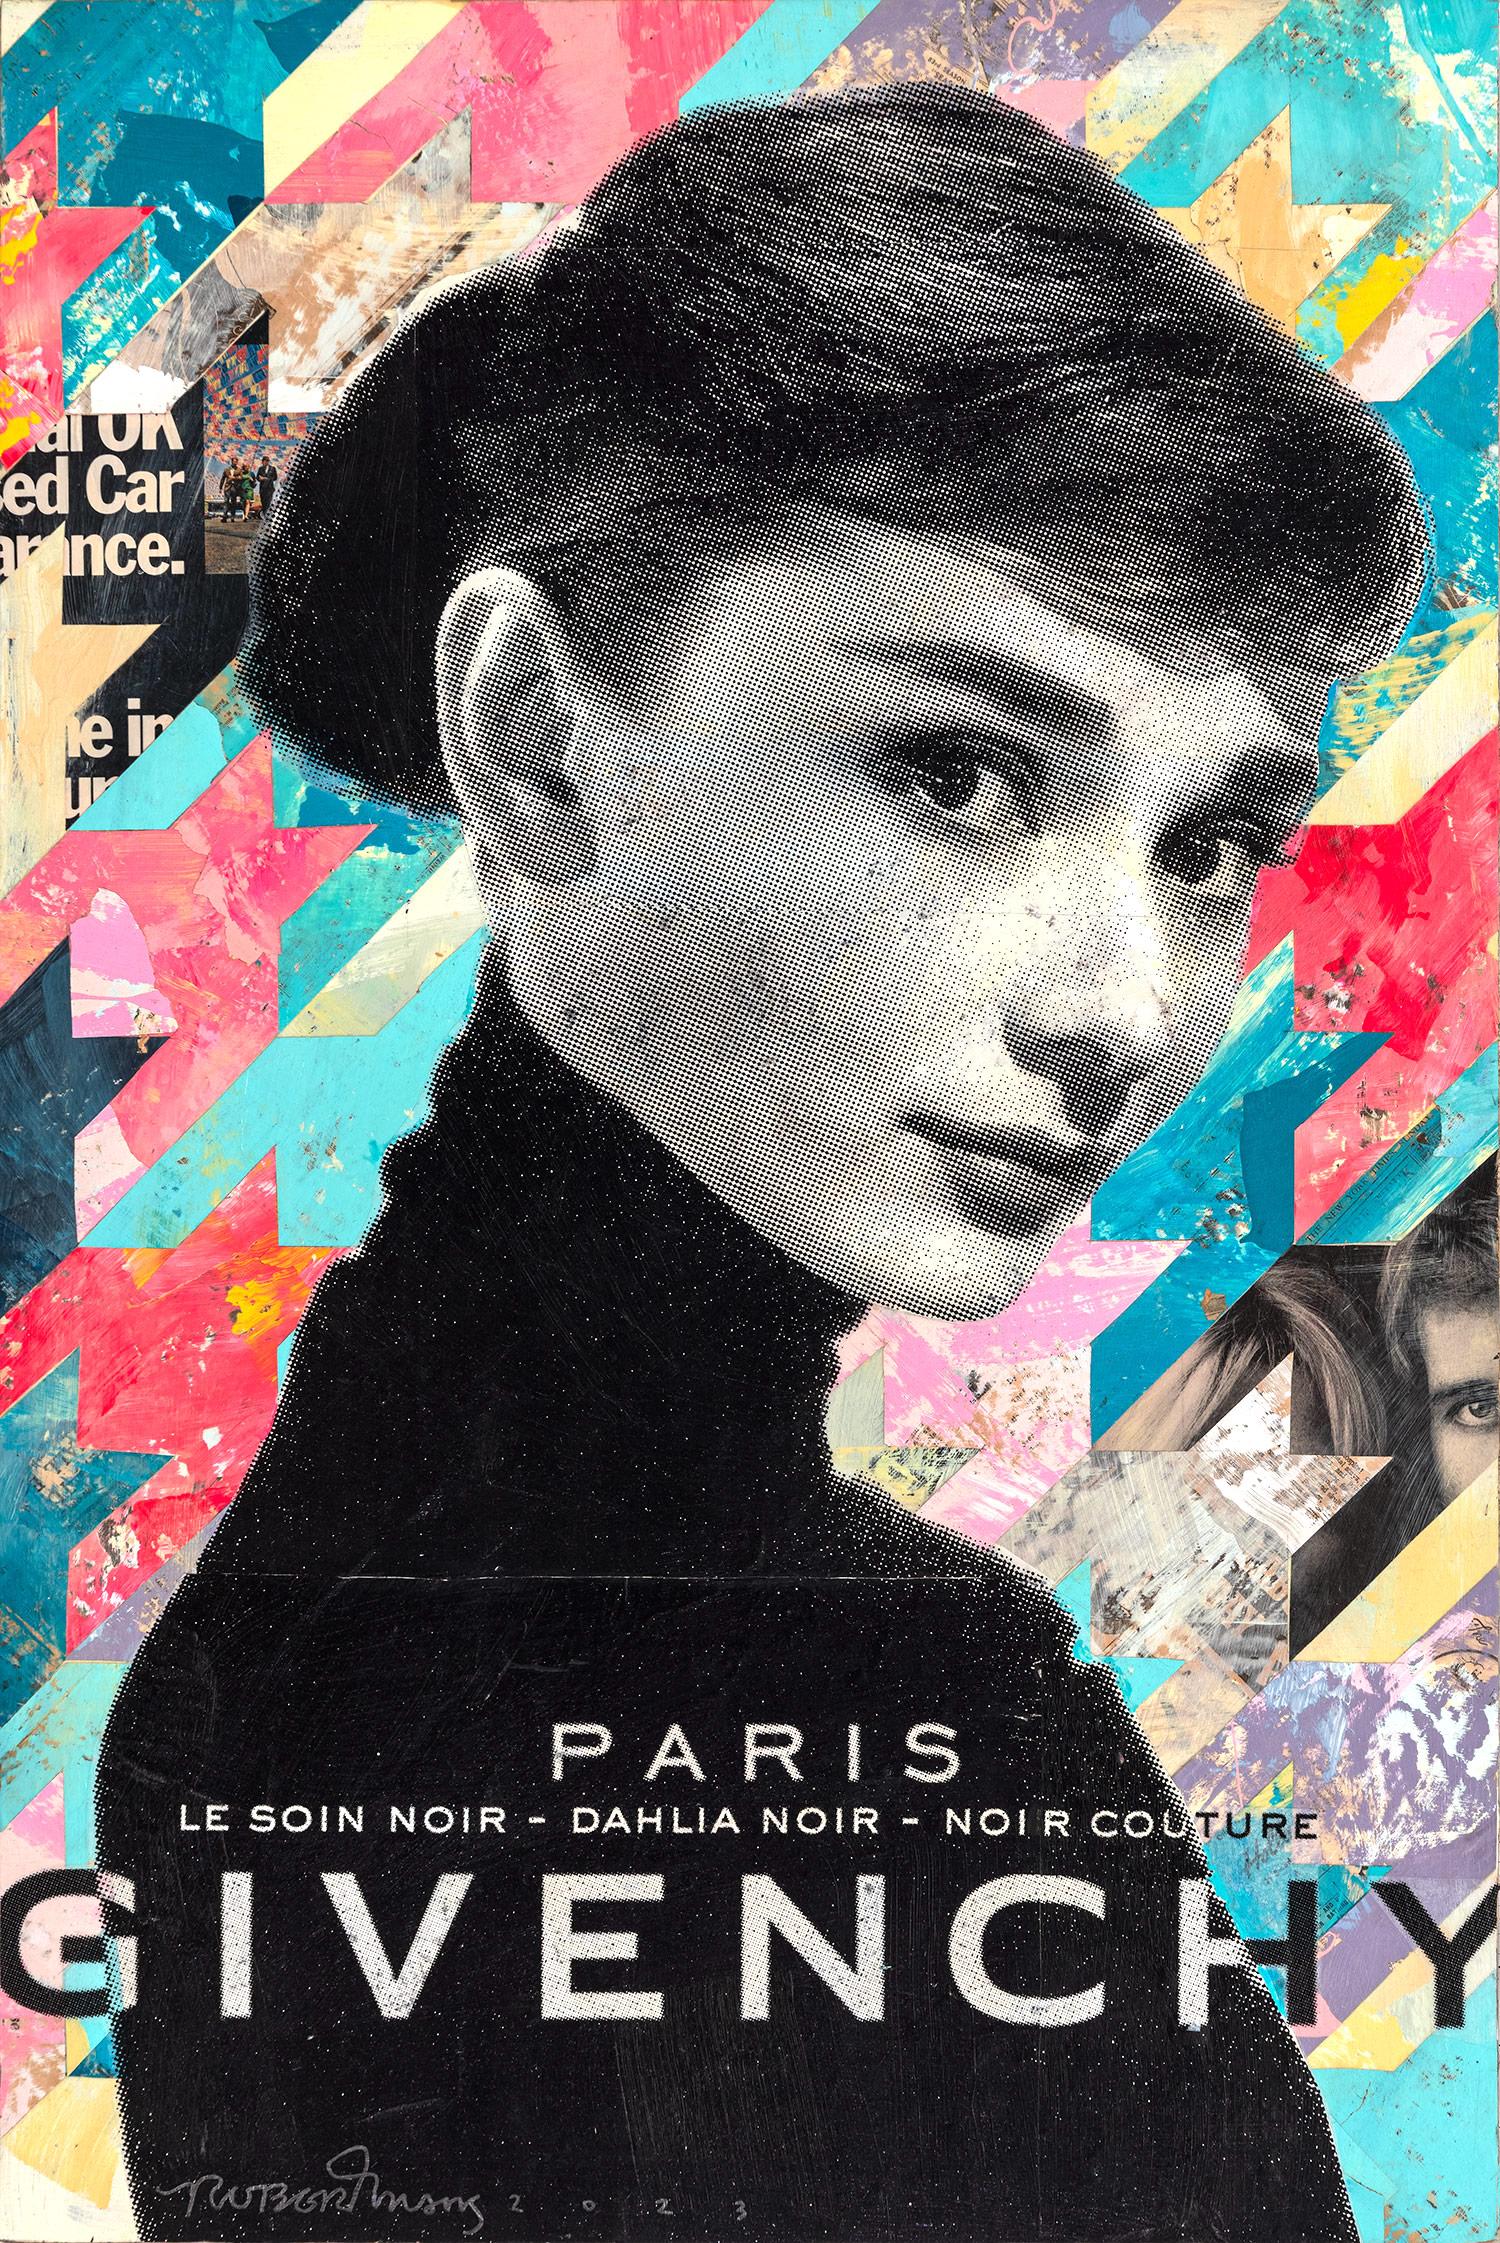 Robert Mars Portrait Painting - "Truth Be Told" Audrey Hepburn Collage Composition Painting on Panel Board